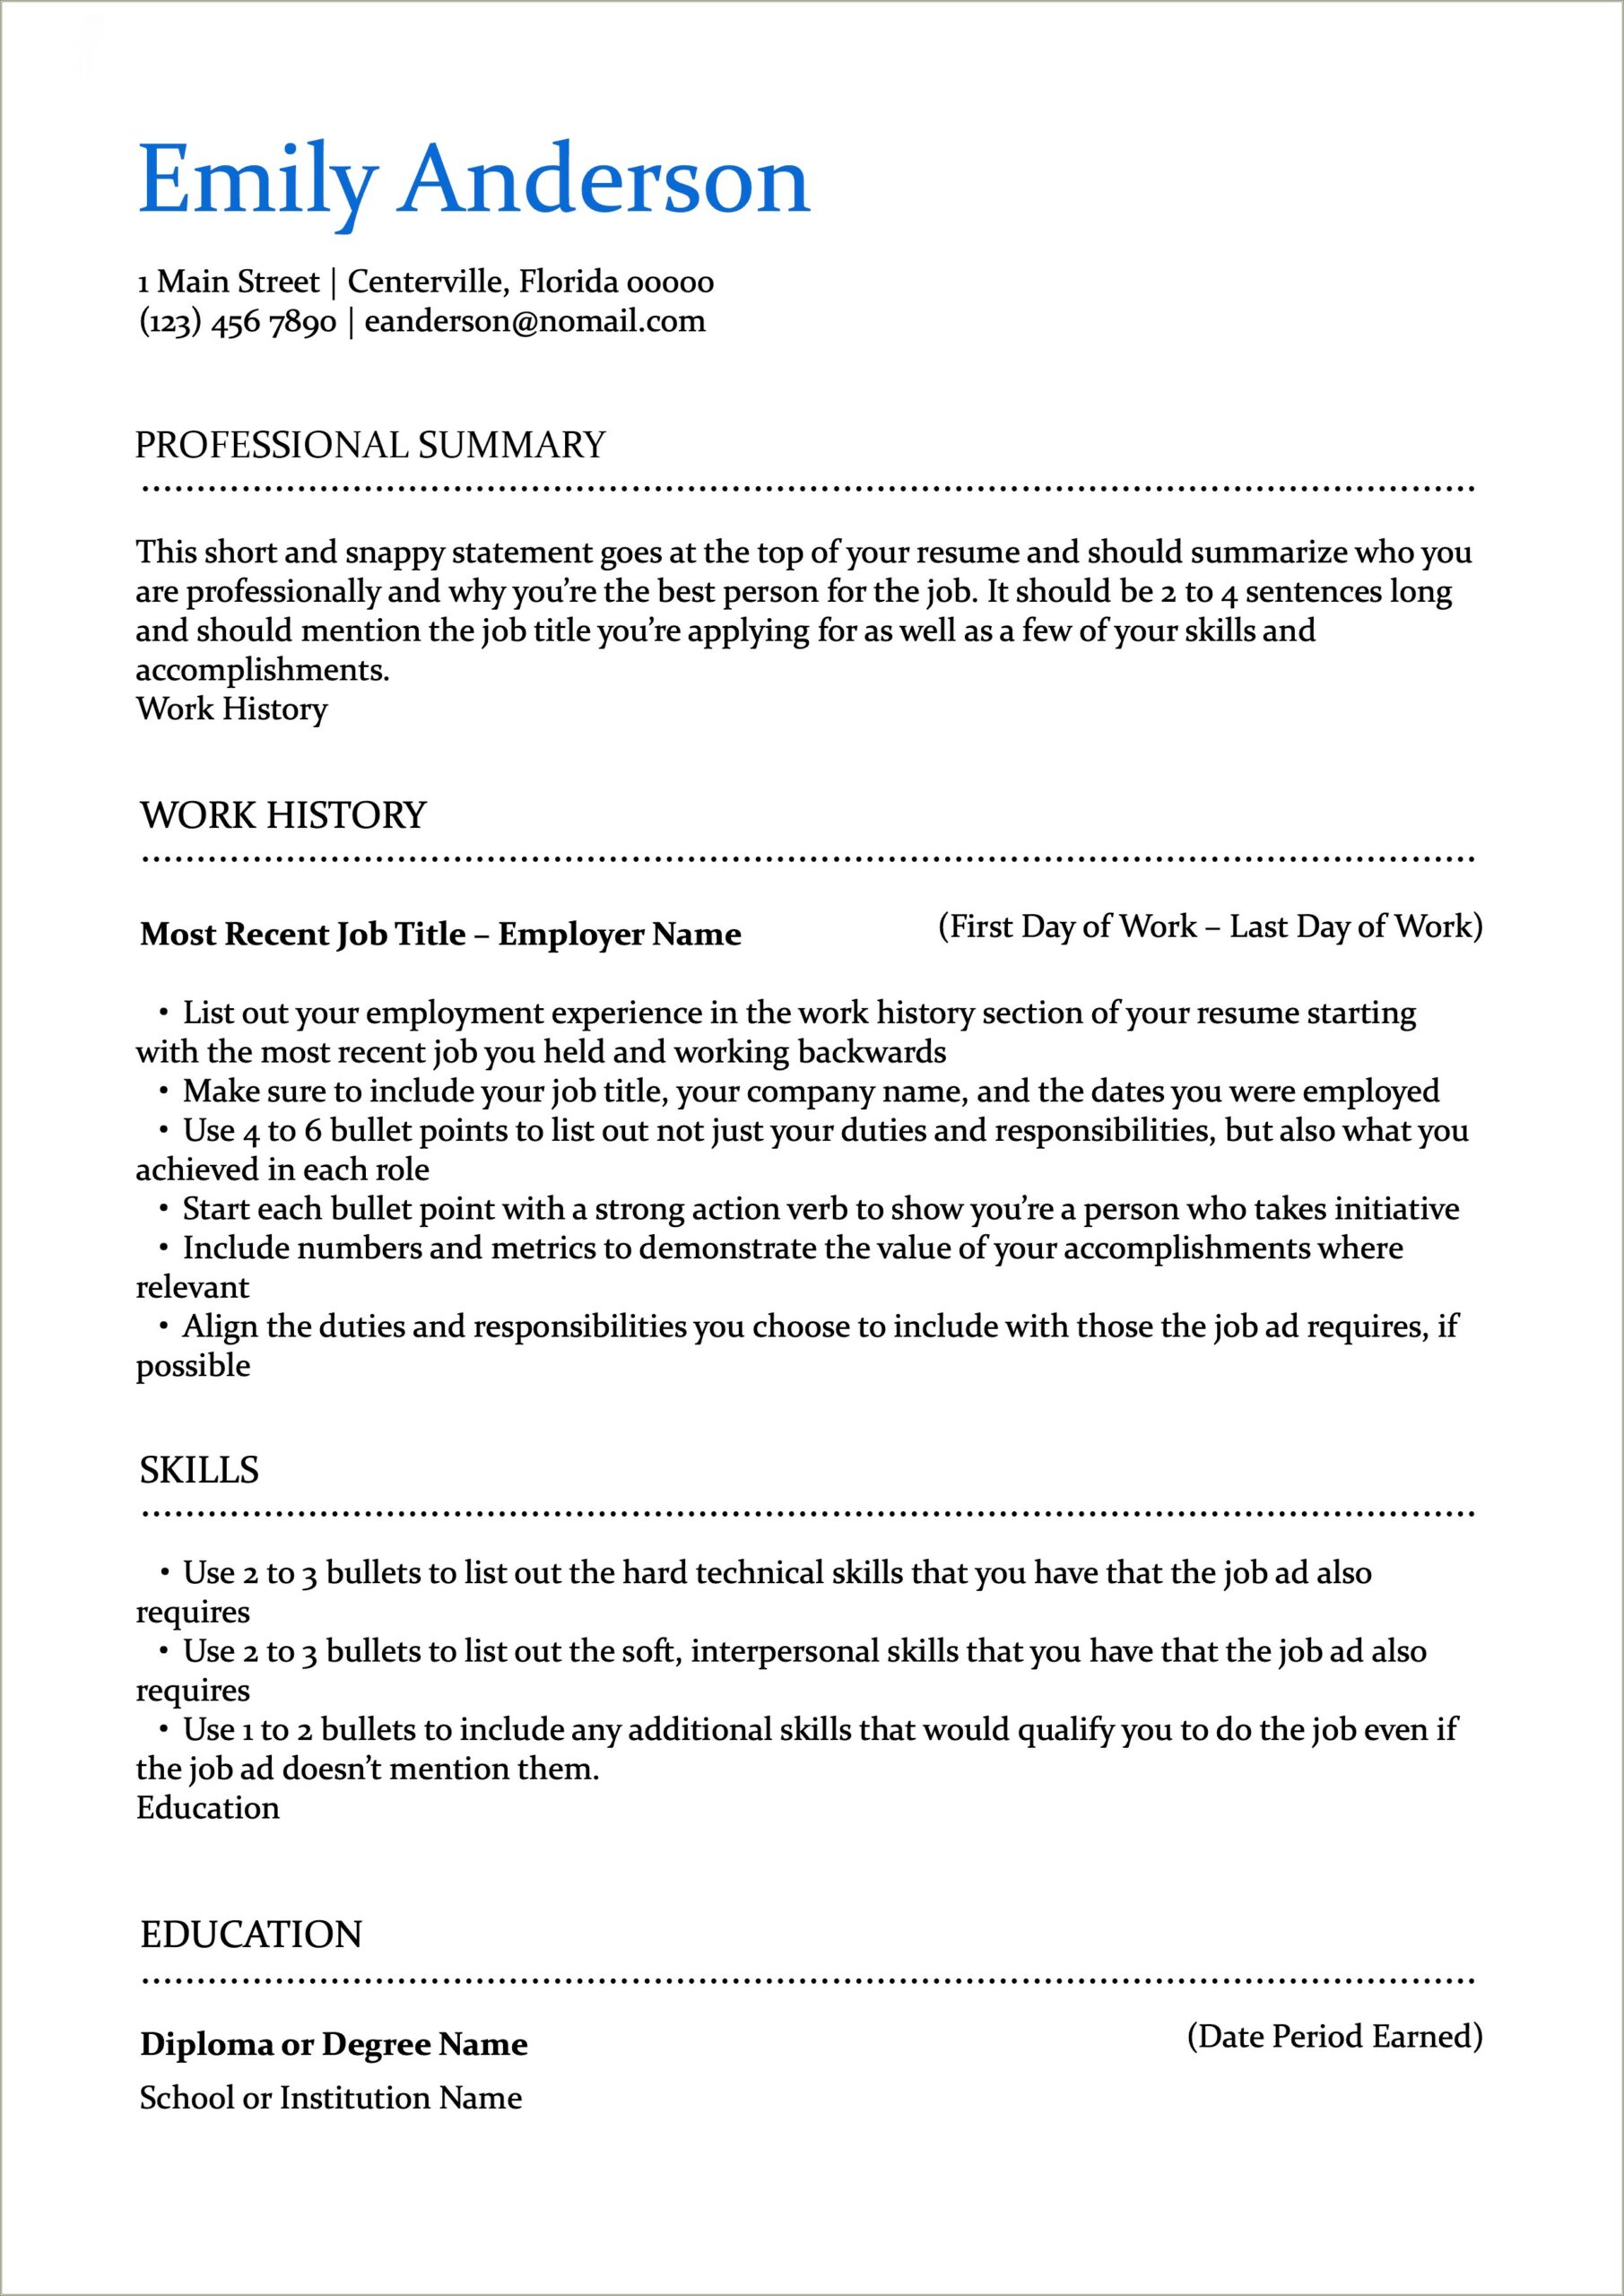 Banking Data Analyst With Tableau Sample Resume